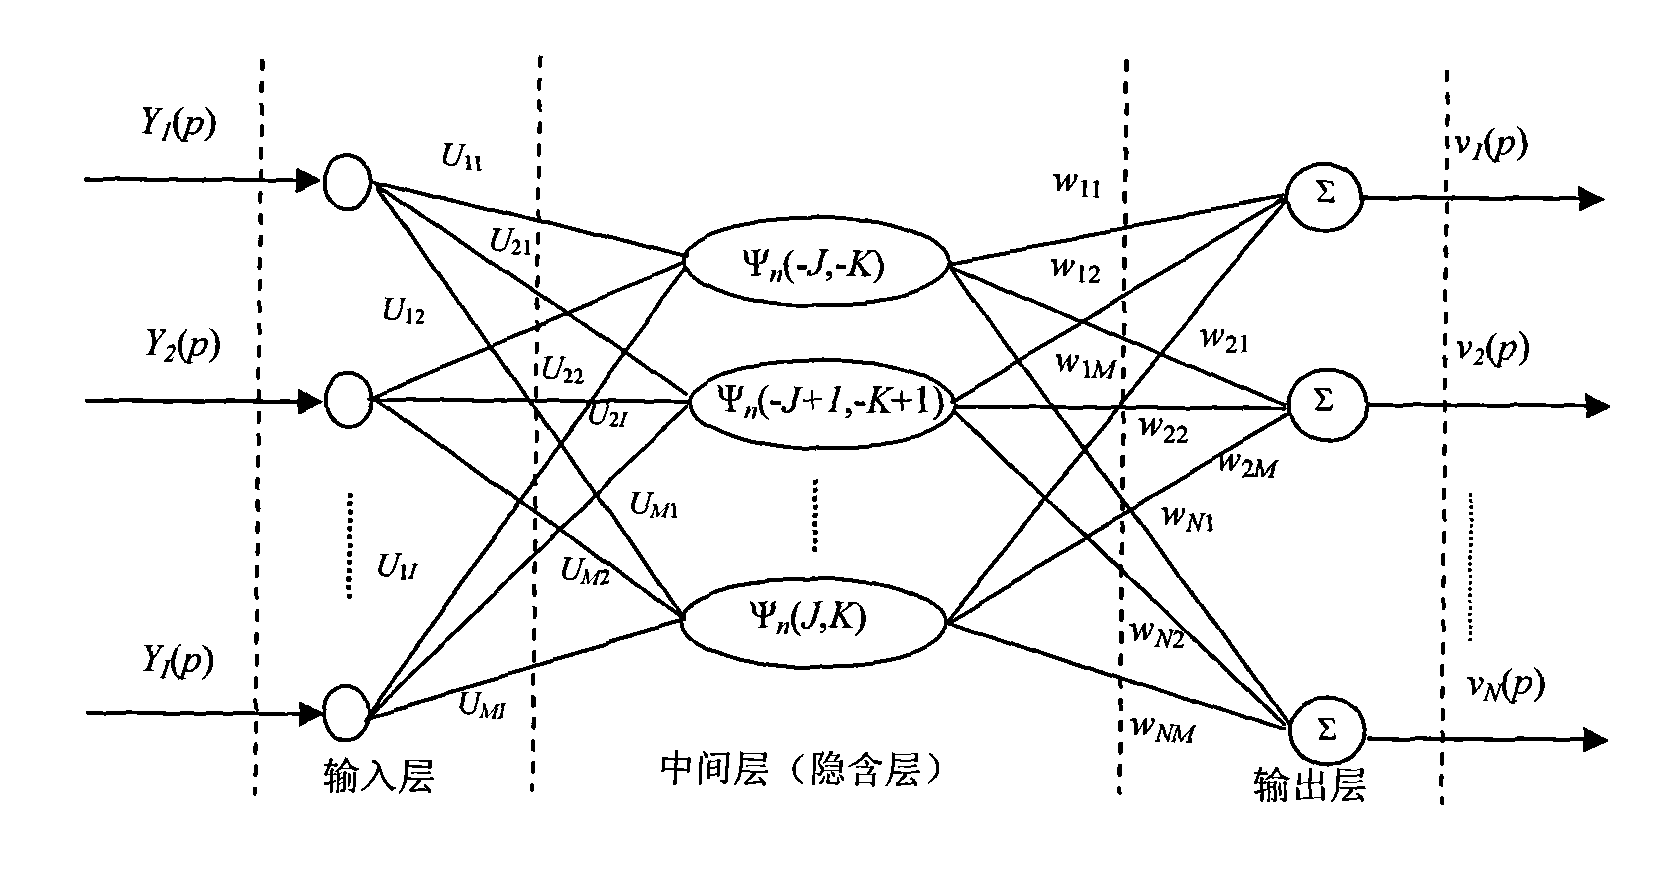 Classification and identification method for communication signal modulating mode based on ART2A-DWNN